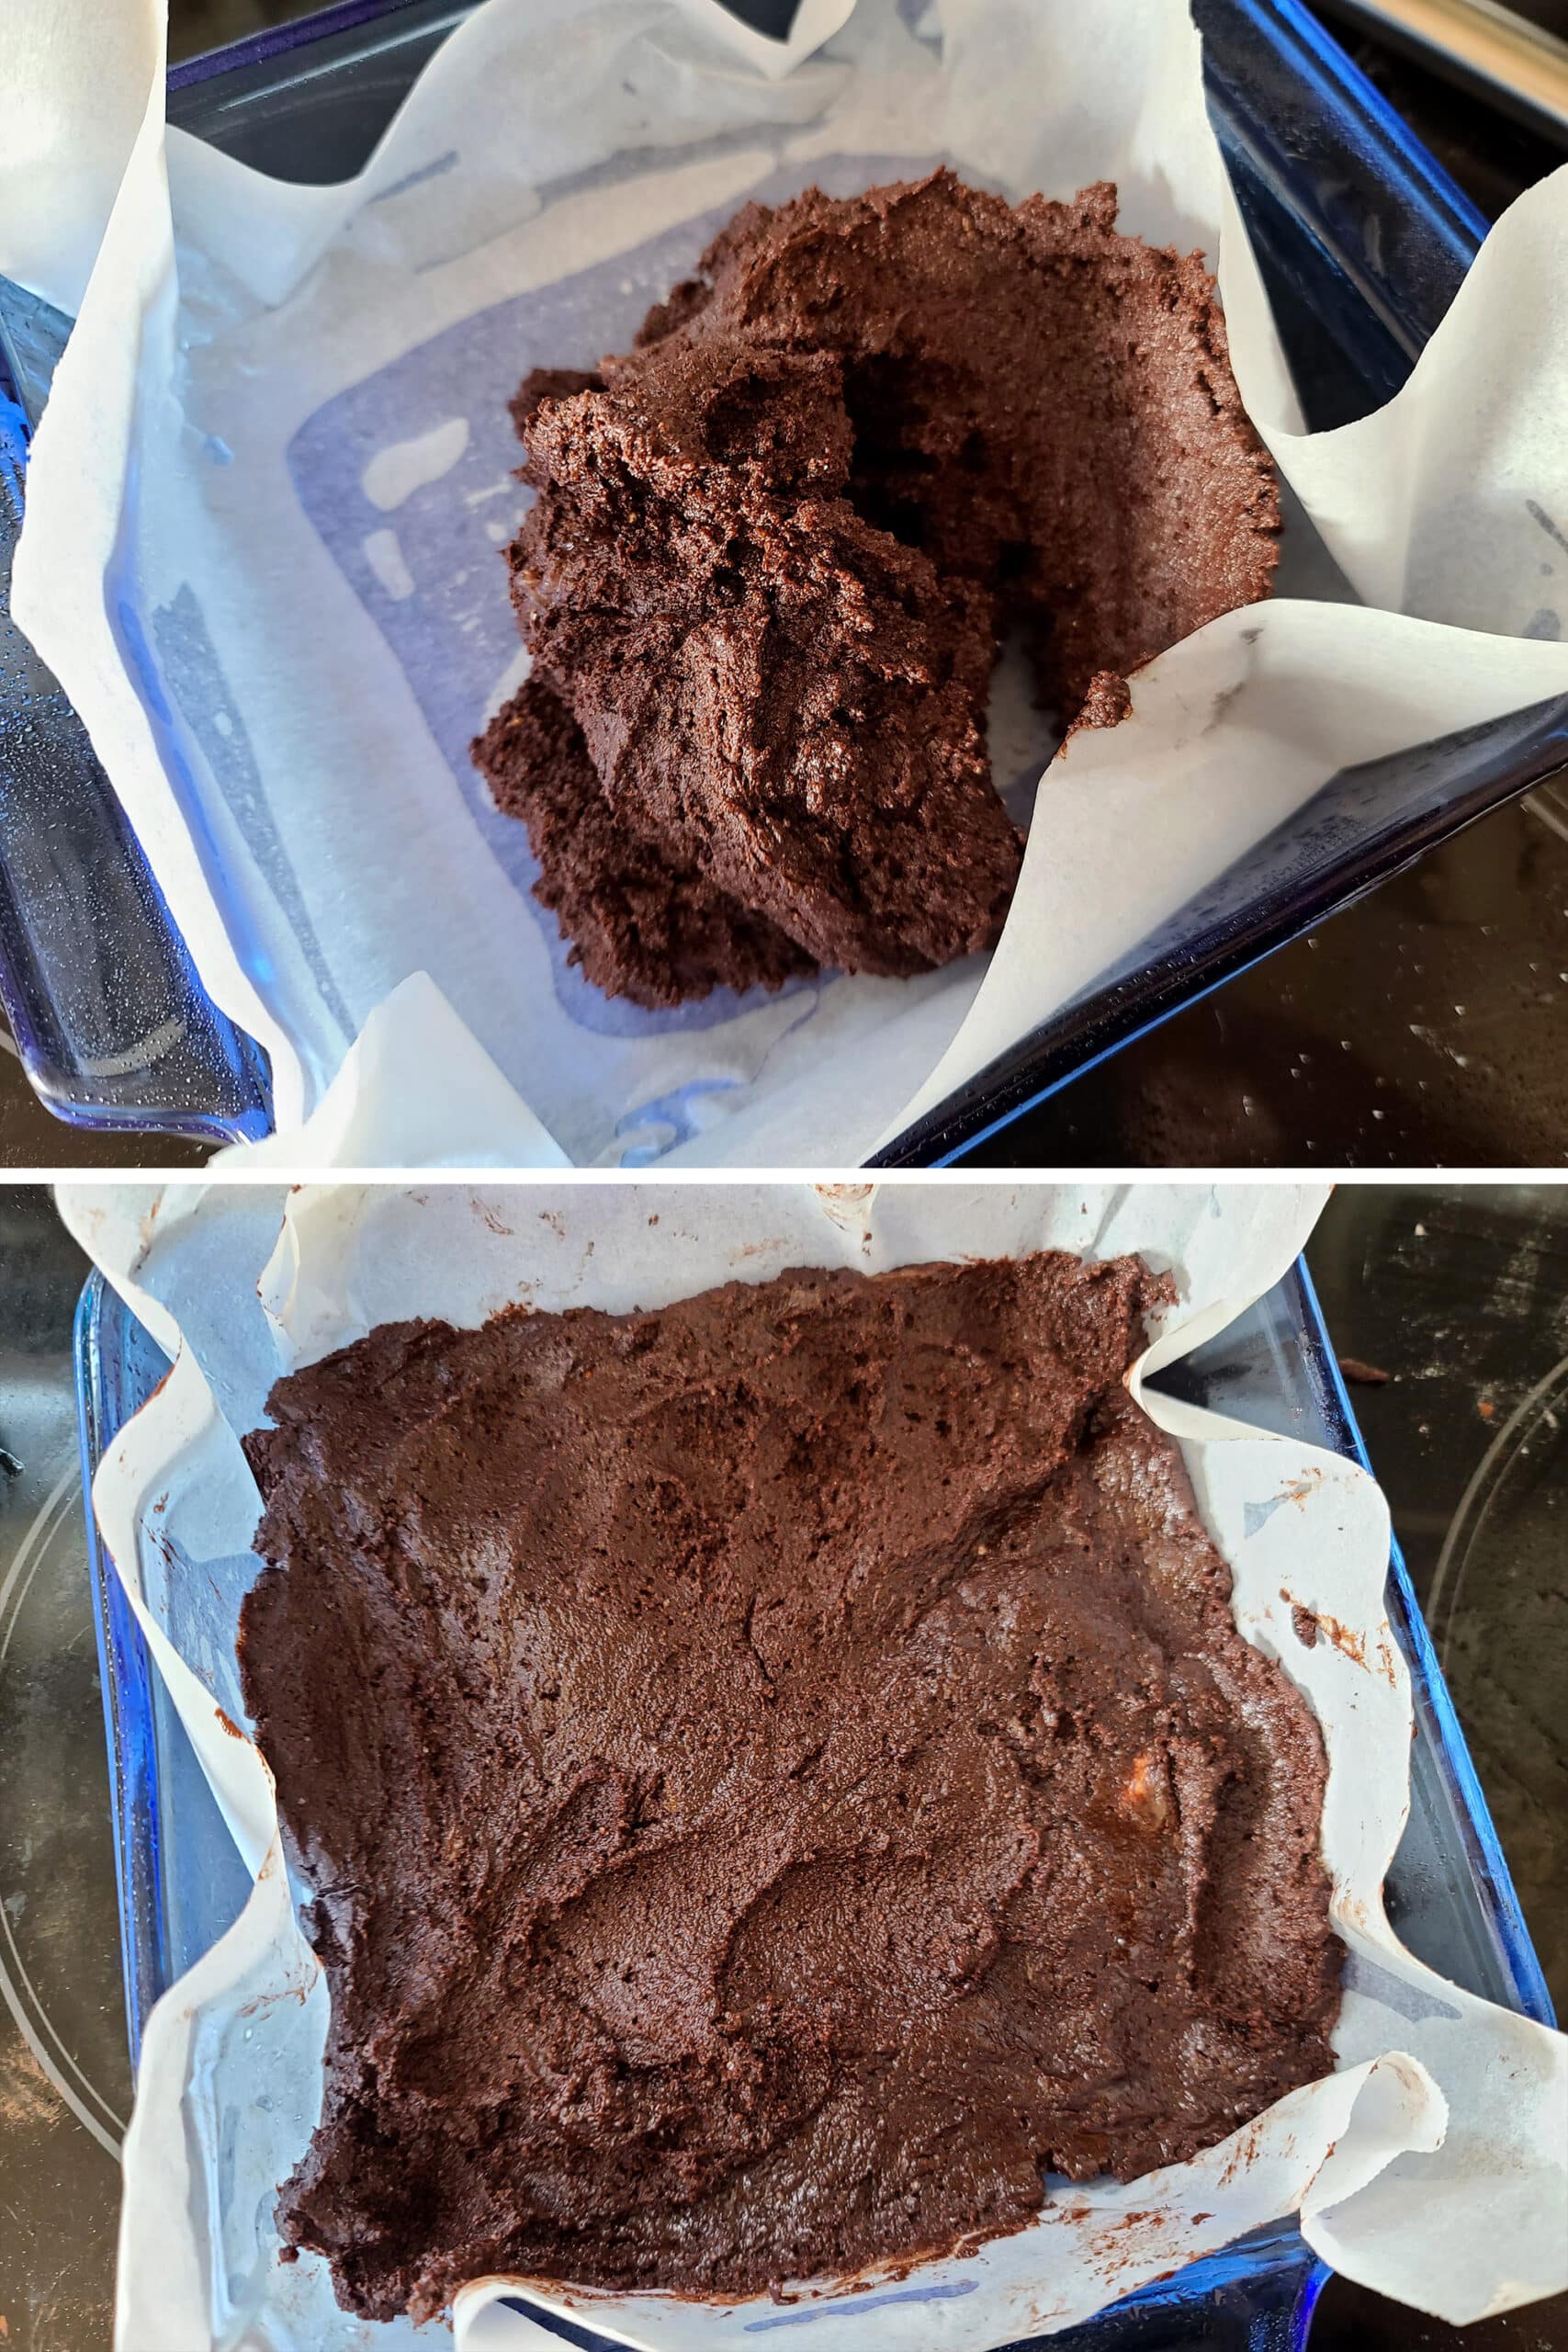 A 2 part image showing the keto brownie batter being spread in the prepared pan.